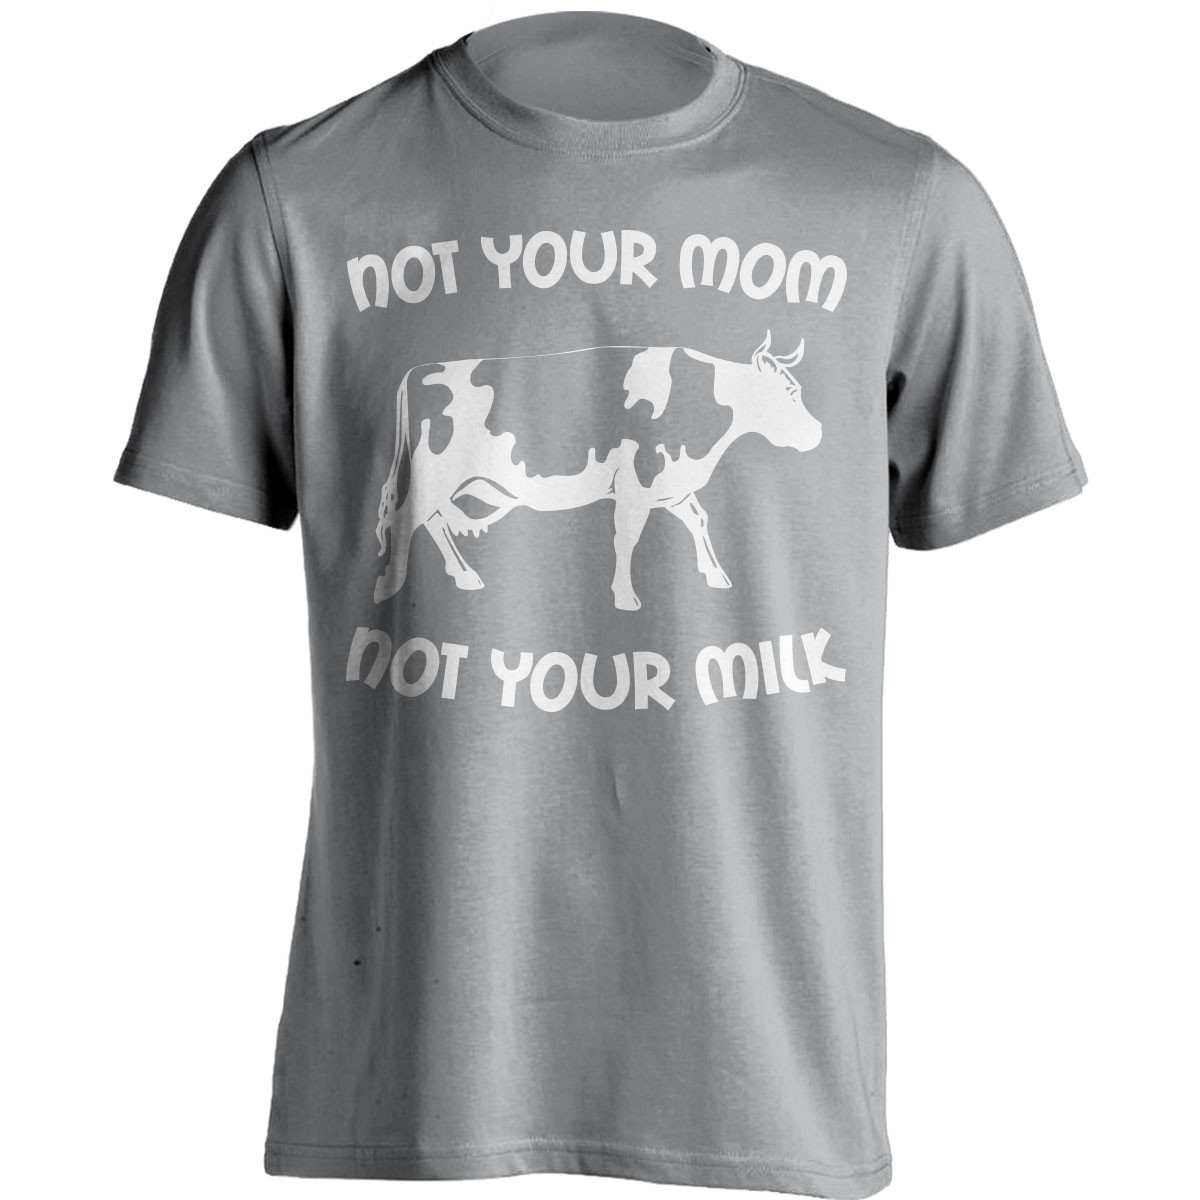 "Not Your Mom, Not Your Milk" T-Shirt